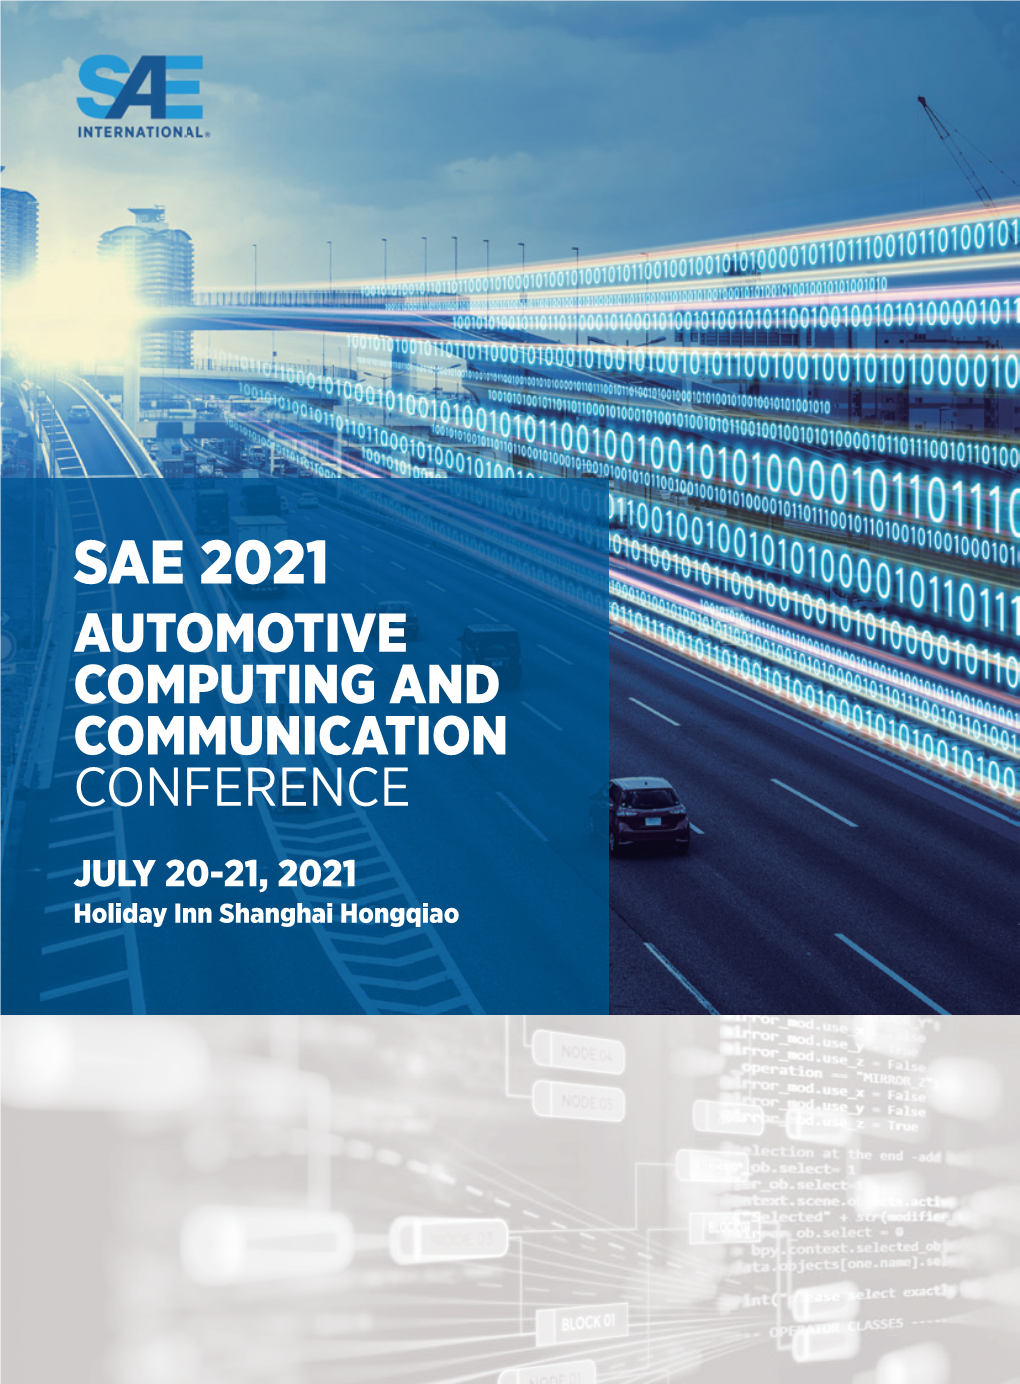 Sae 2021 Automotive Computing and Communication Conference